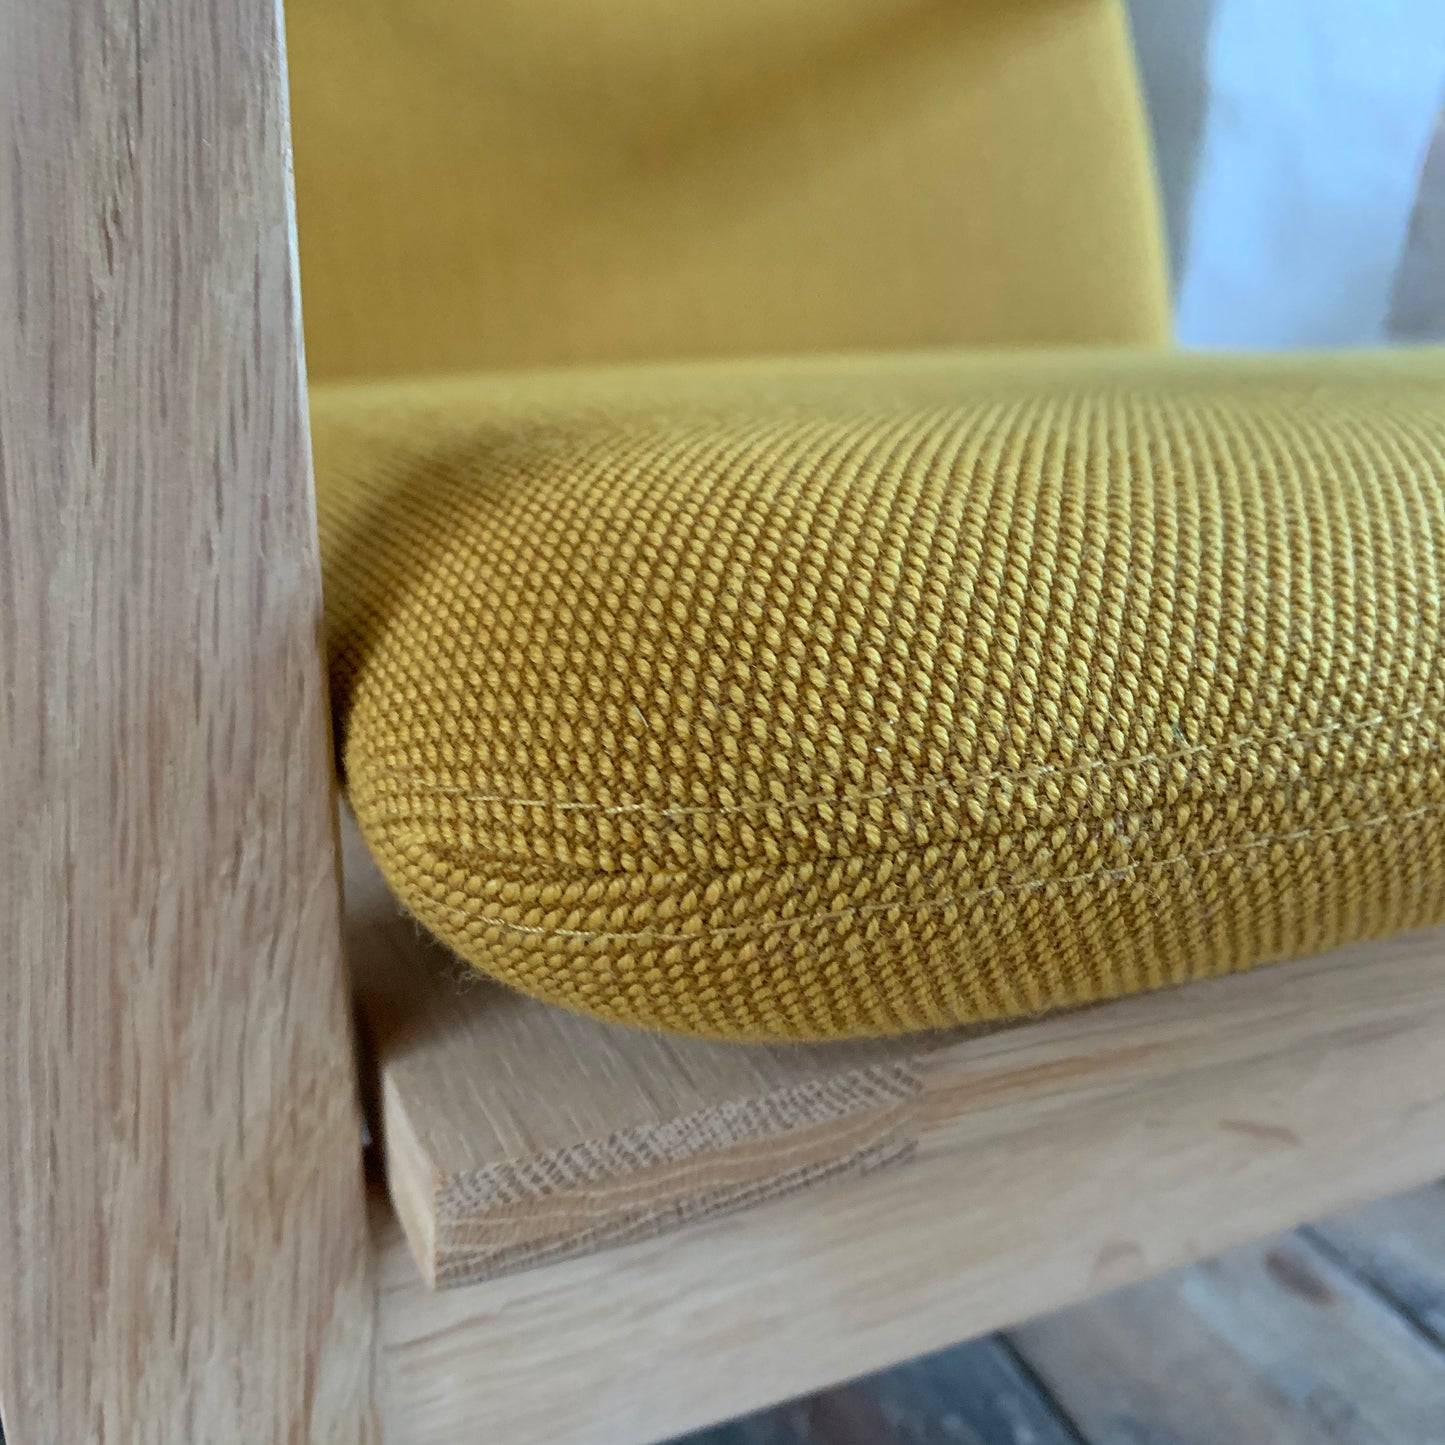 New cushions for Børge Mogensen 2256 in Steelcut Trio 3 from Kvadrat